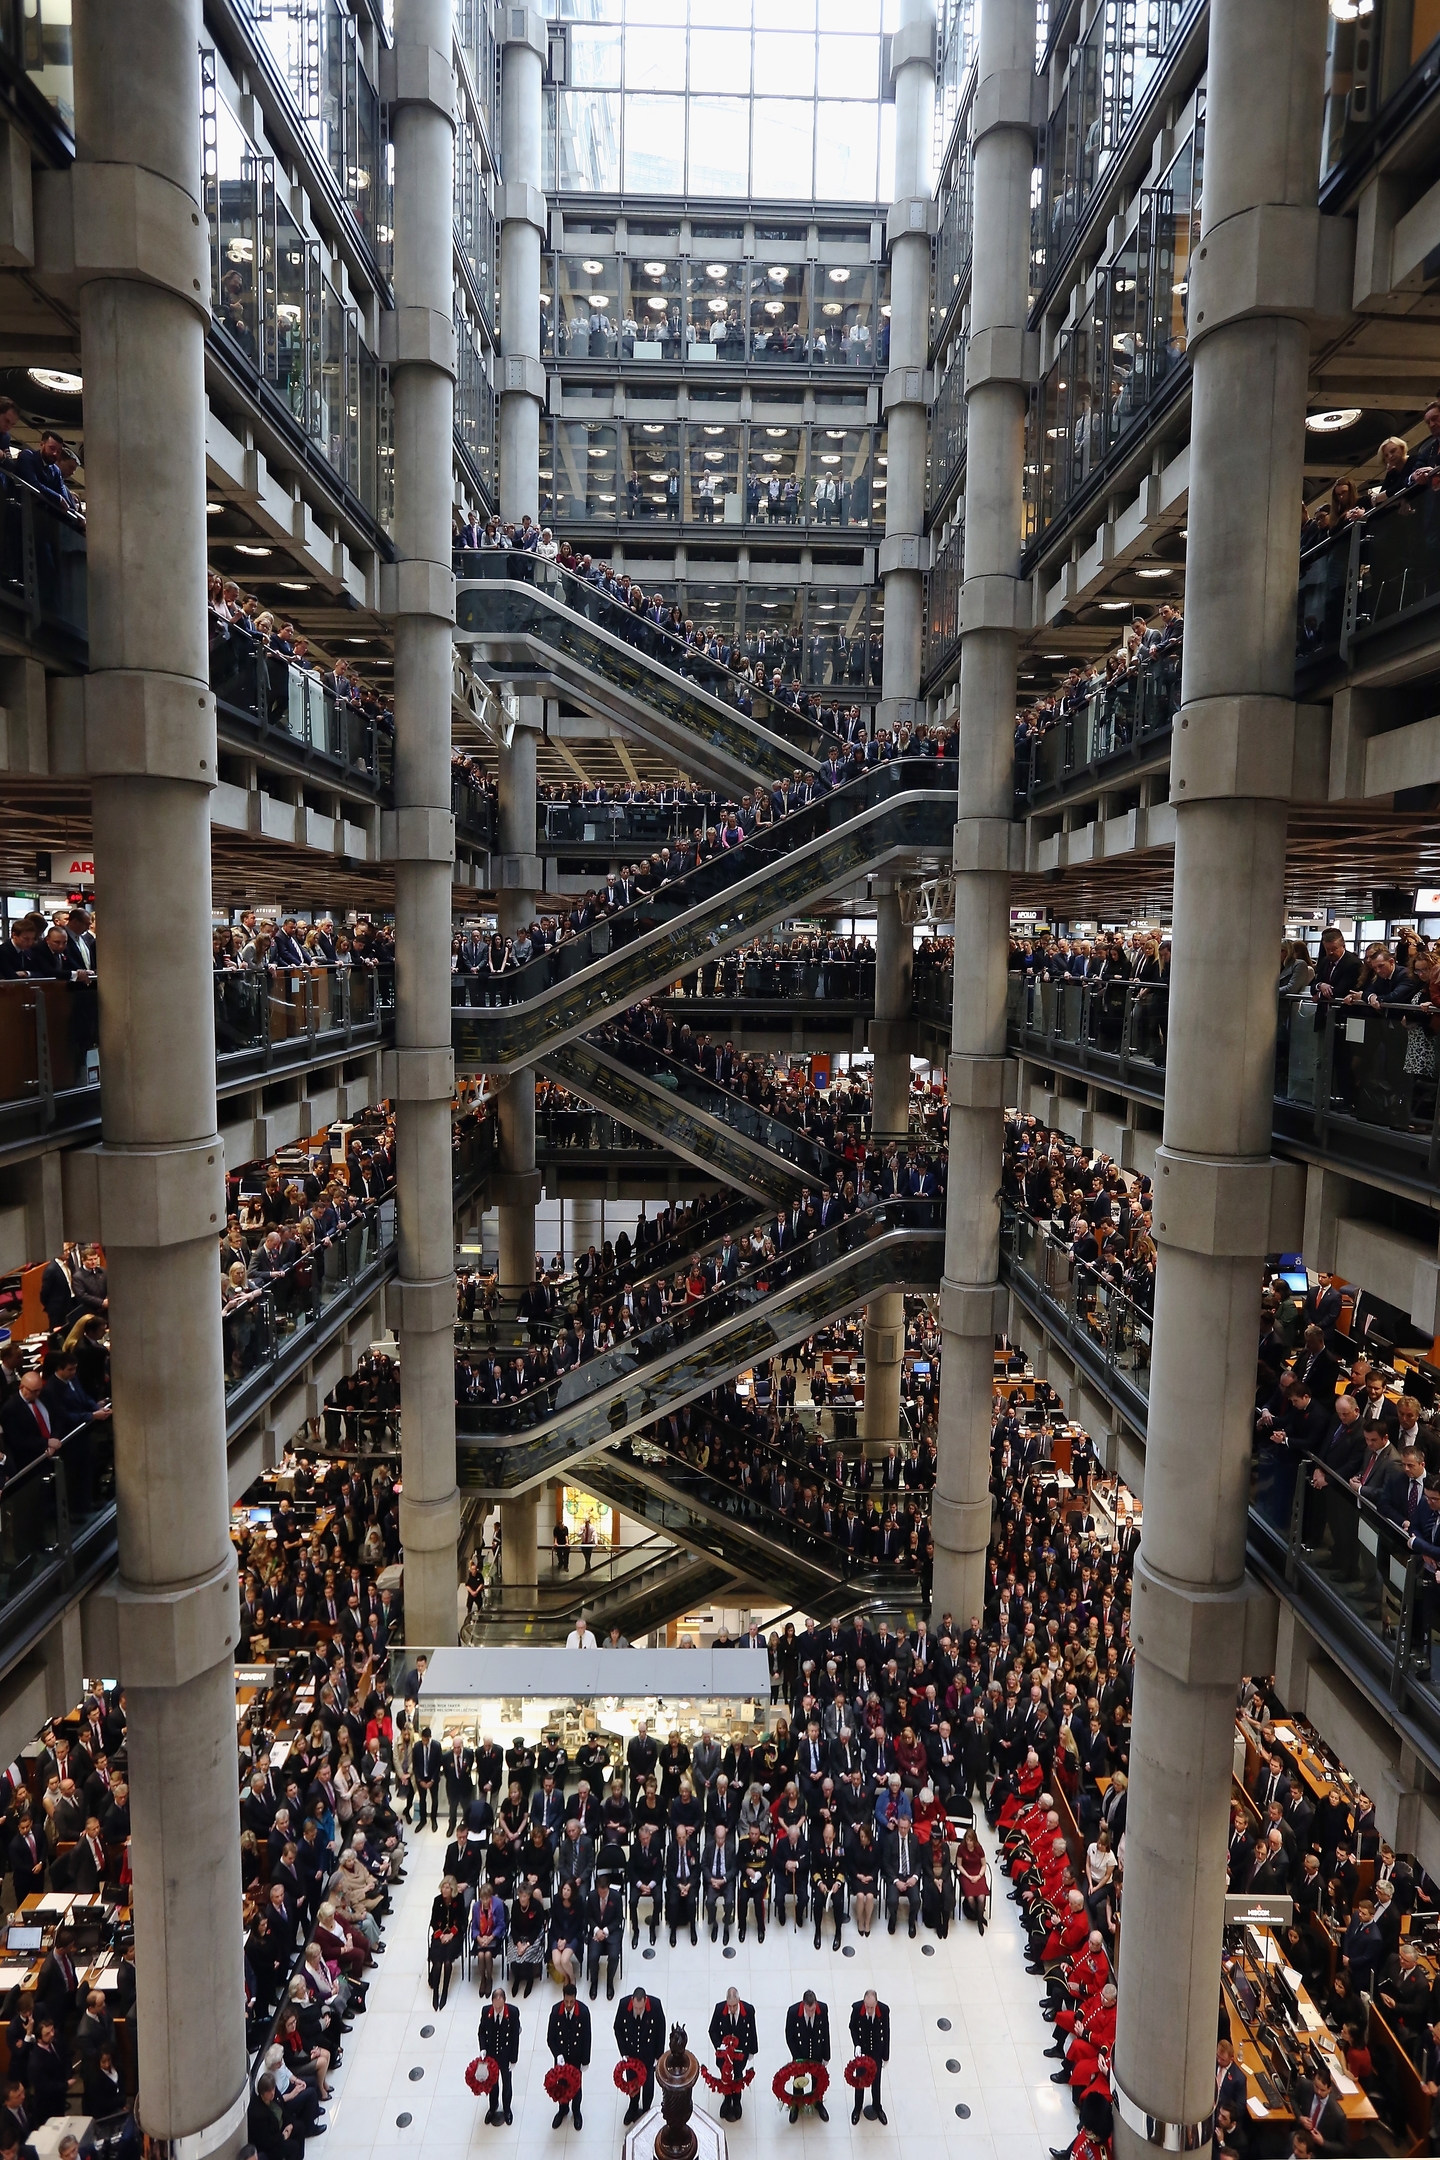  Brokers and underwriters line the balconies and escalators of the Lloyd's of London building during a service of Remembrance on November 11, 2015 in London, England. The annual Armistice Day service honours those who have lost their lives during times of war. The service at Lloyd's is observed with the ringing of the Lutine Bell, the laying of wreaths before the Book of Remembrance and a two minute silence. 